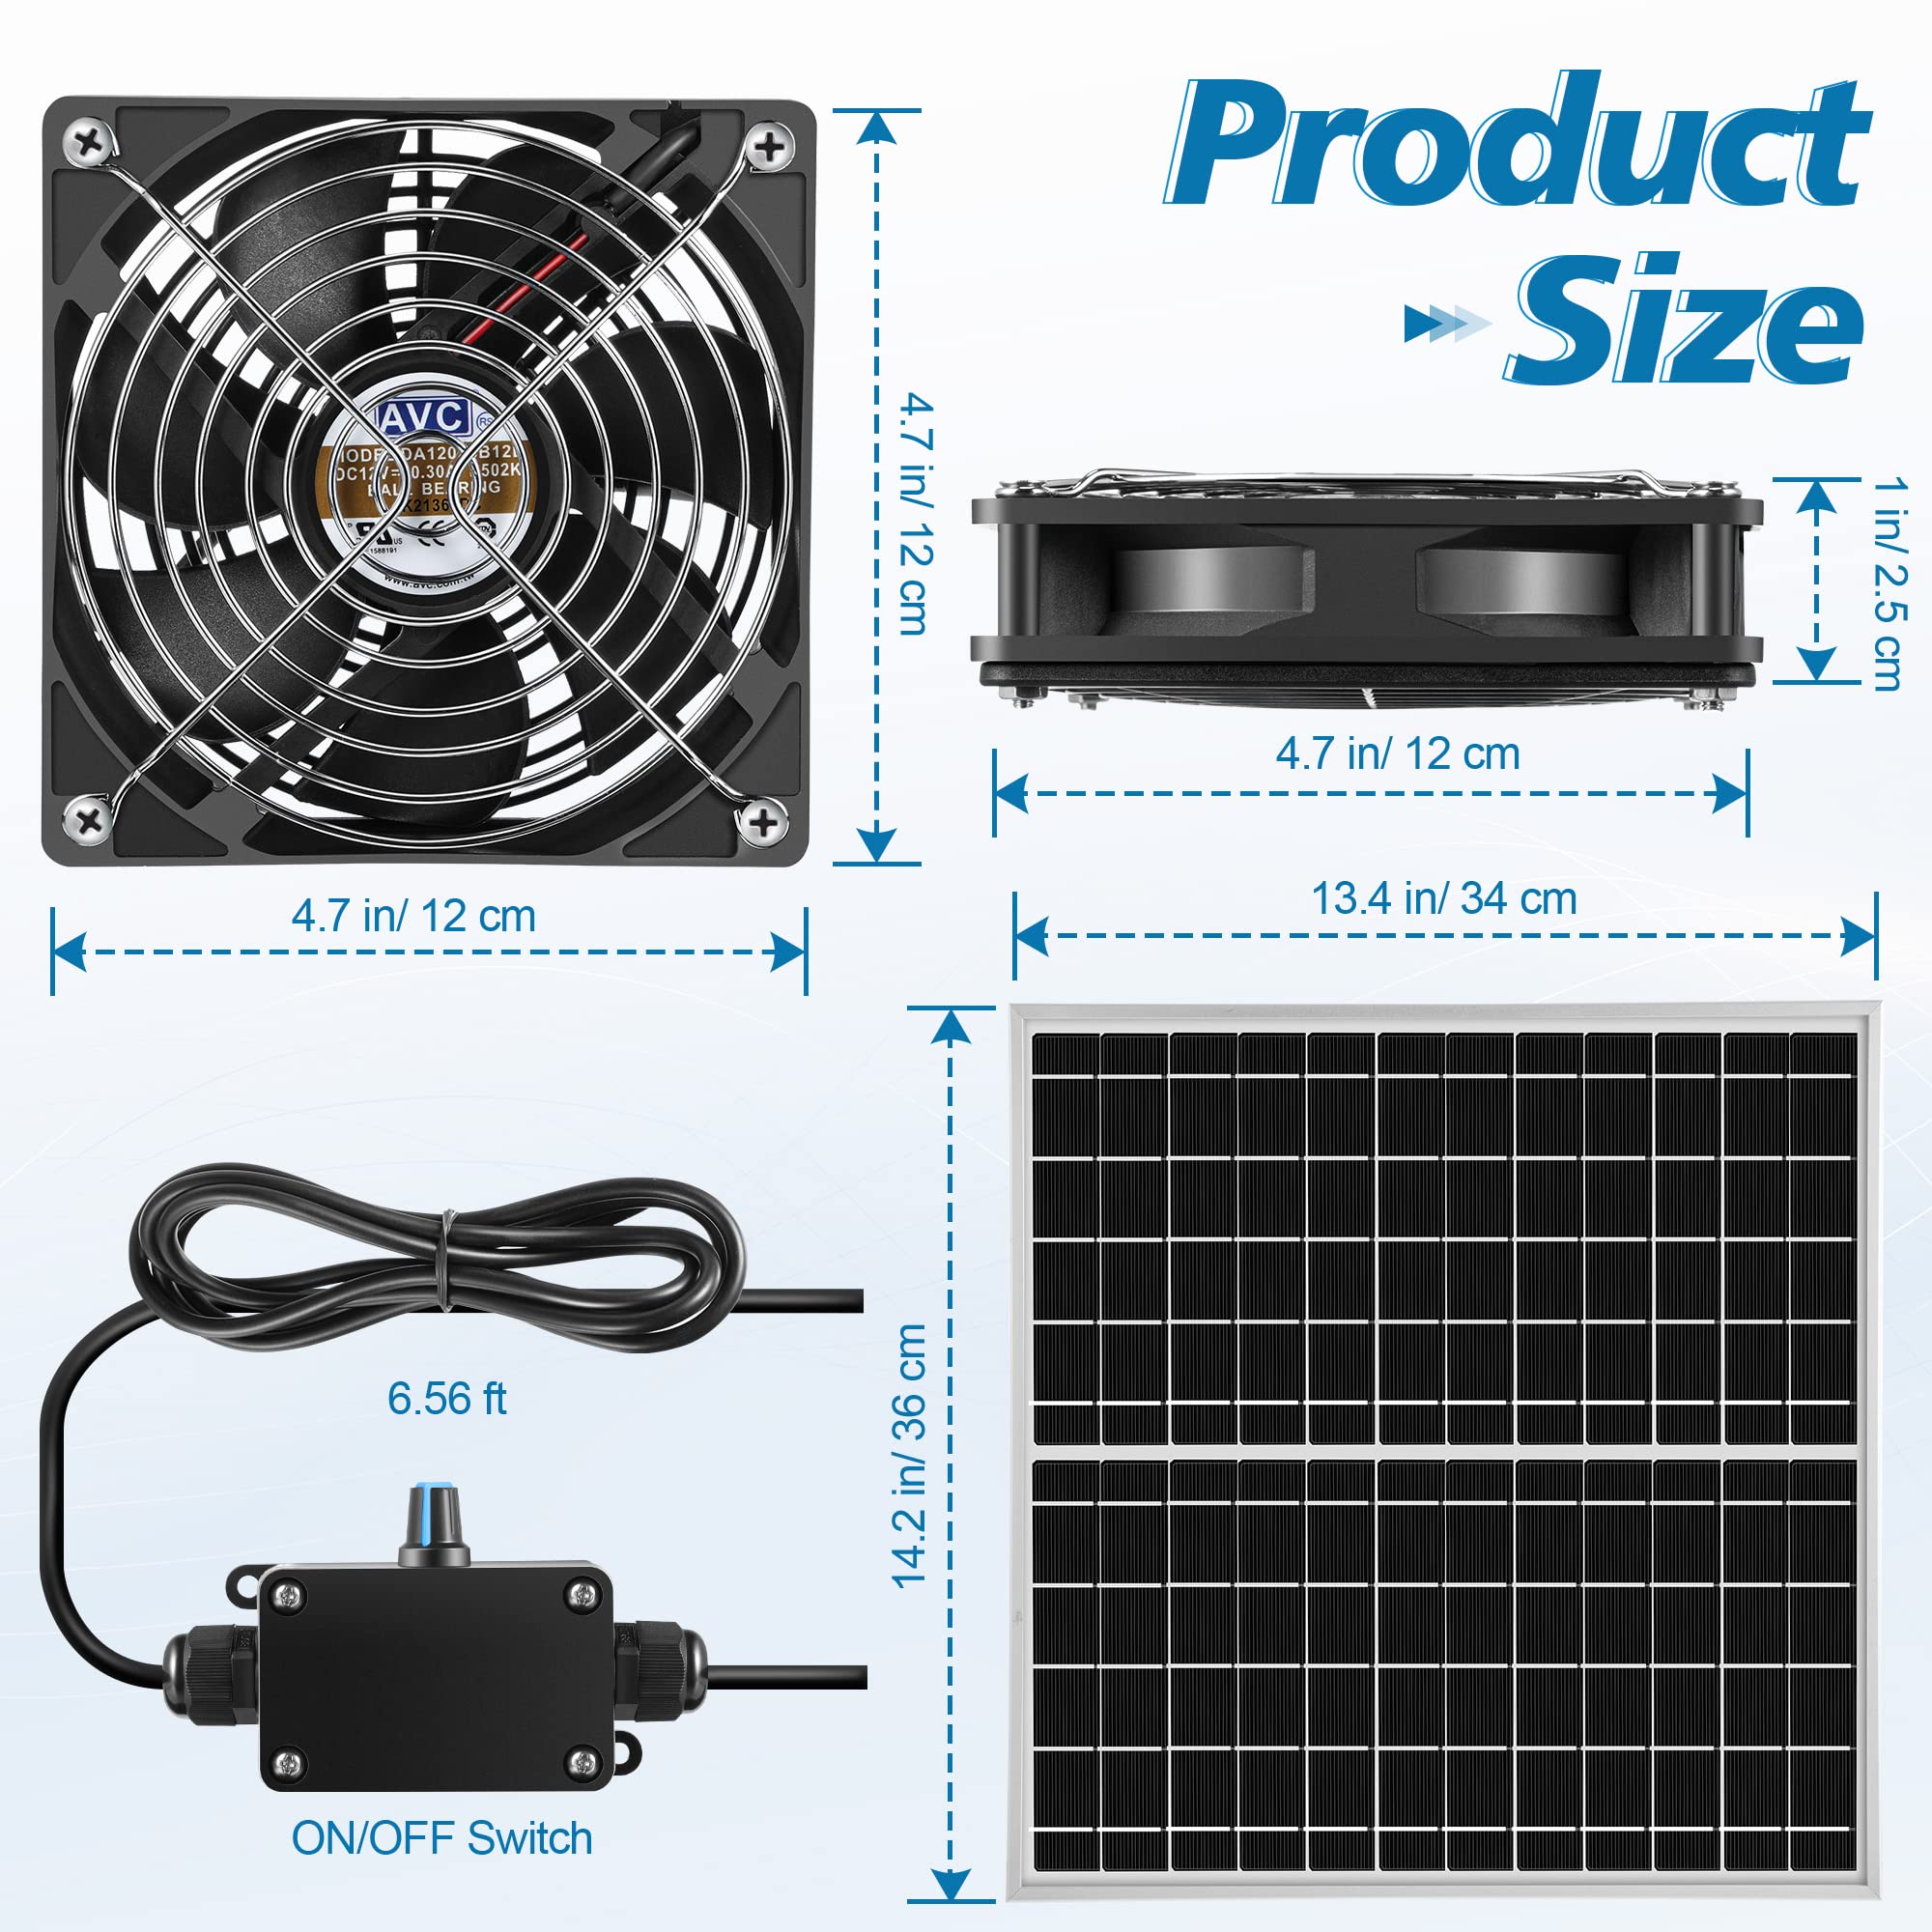 Gulfmew 20W Solar Fan with 3Pcs Off/On Adjustable Switch Exhaust Fans,Greenhouse Solar Powered Waterproof Fan Kit for Chicken Coop, Dog House, Shed, Gable, Attic